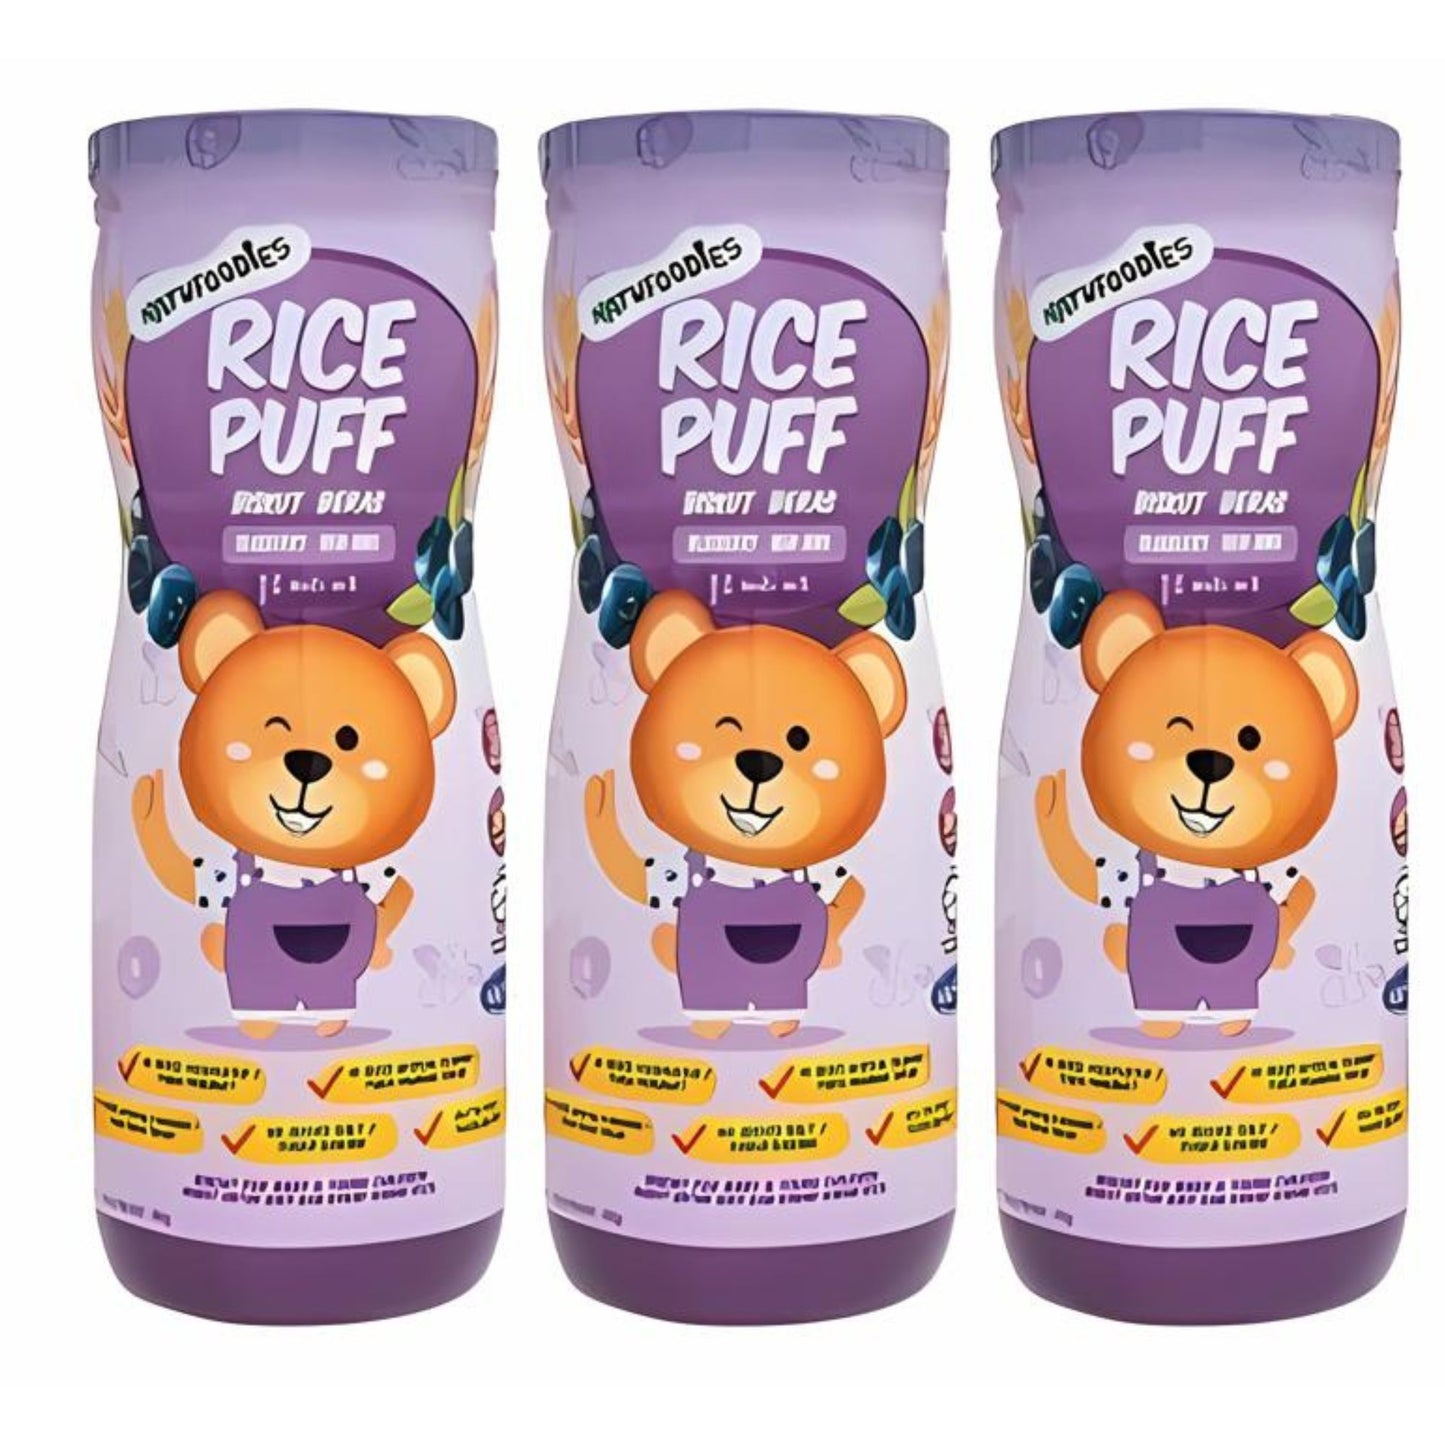 BUNDLE OF 3 Natufoodies Rice Puff Snack Suitable for Baby 8 Months Up